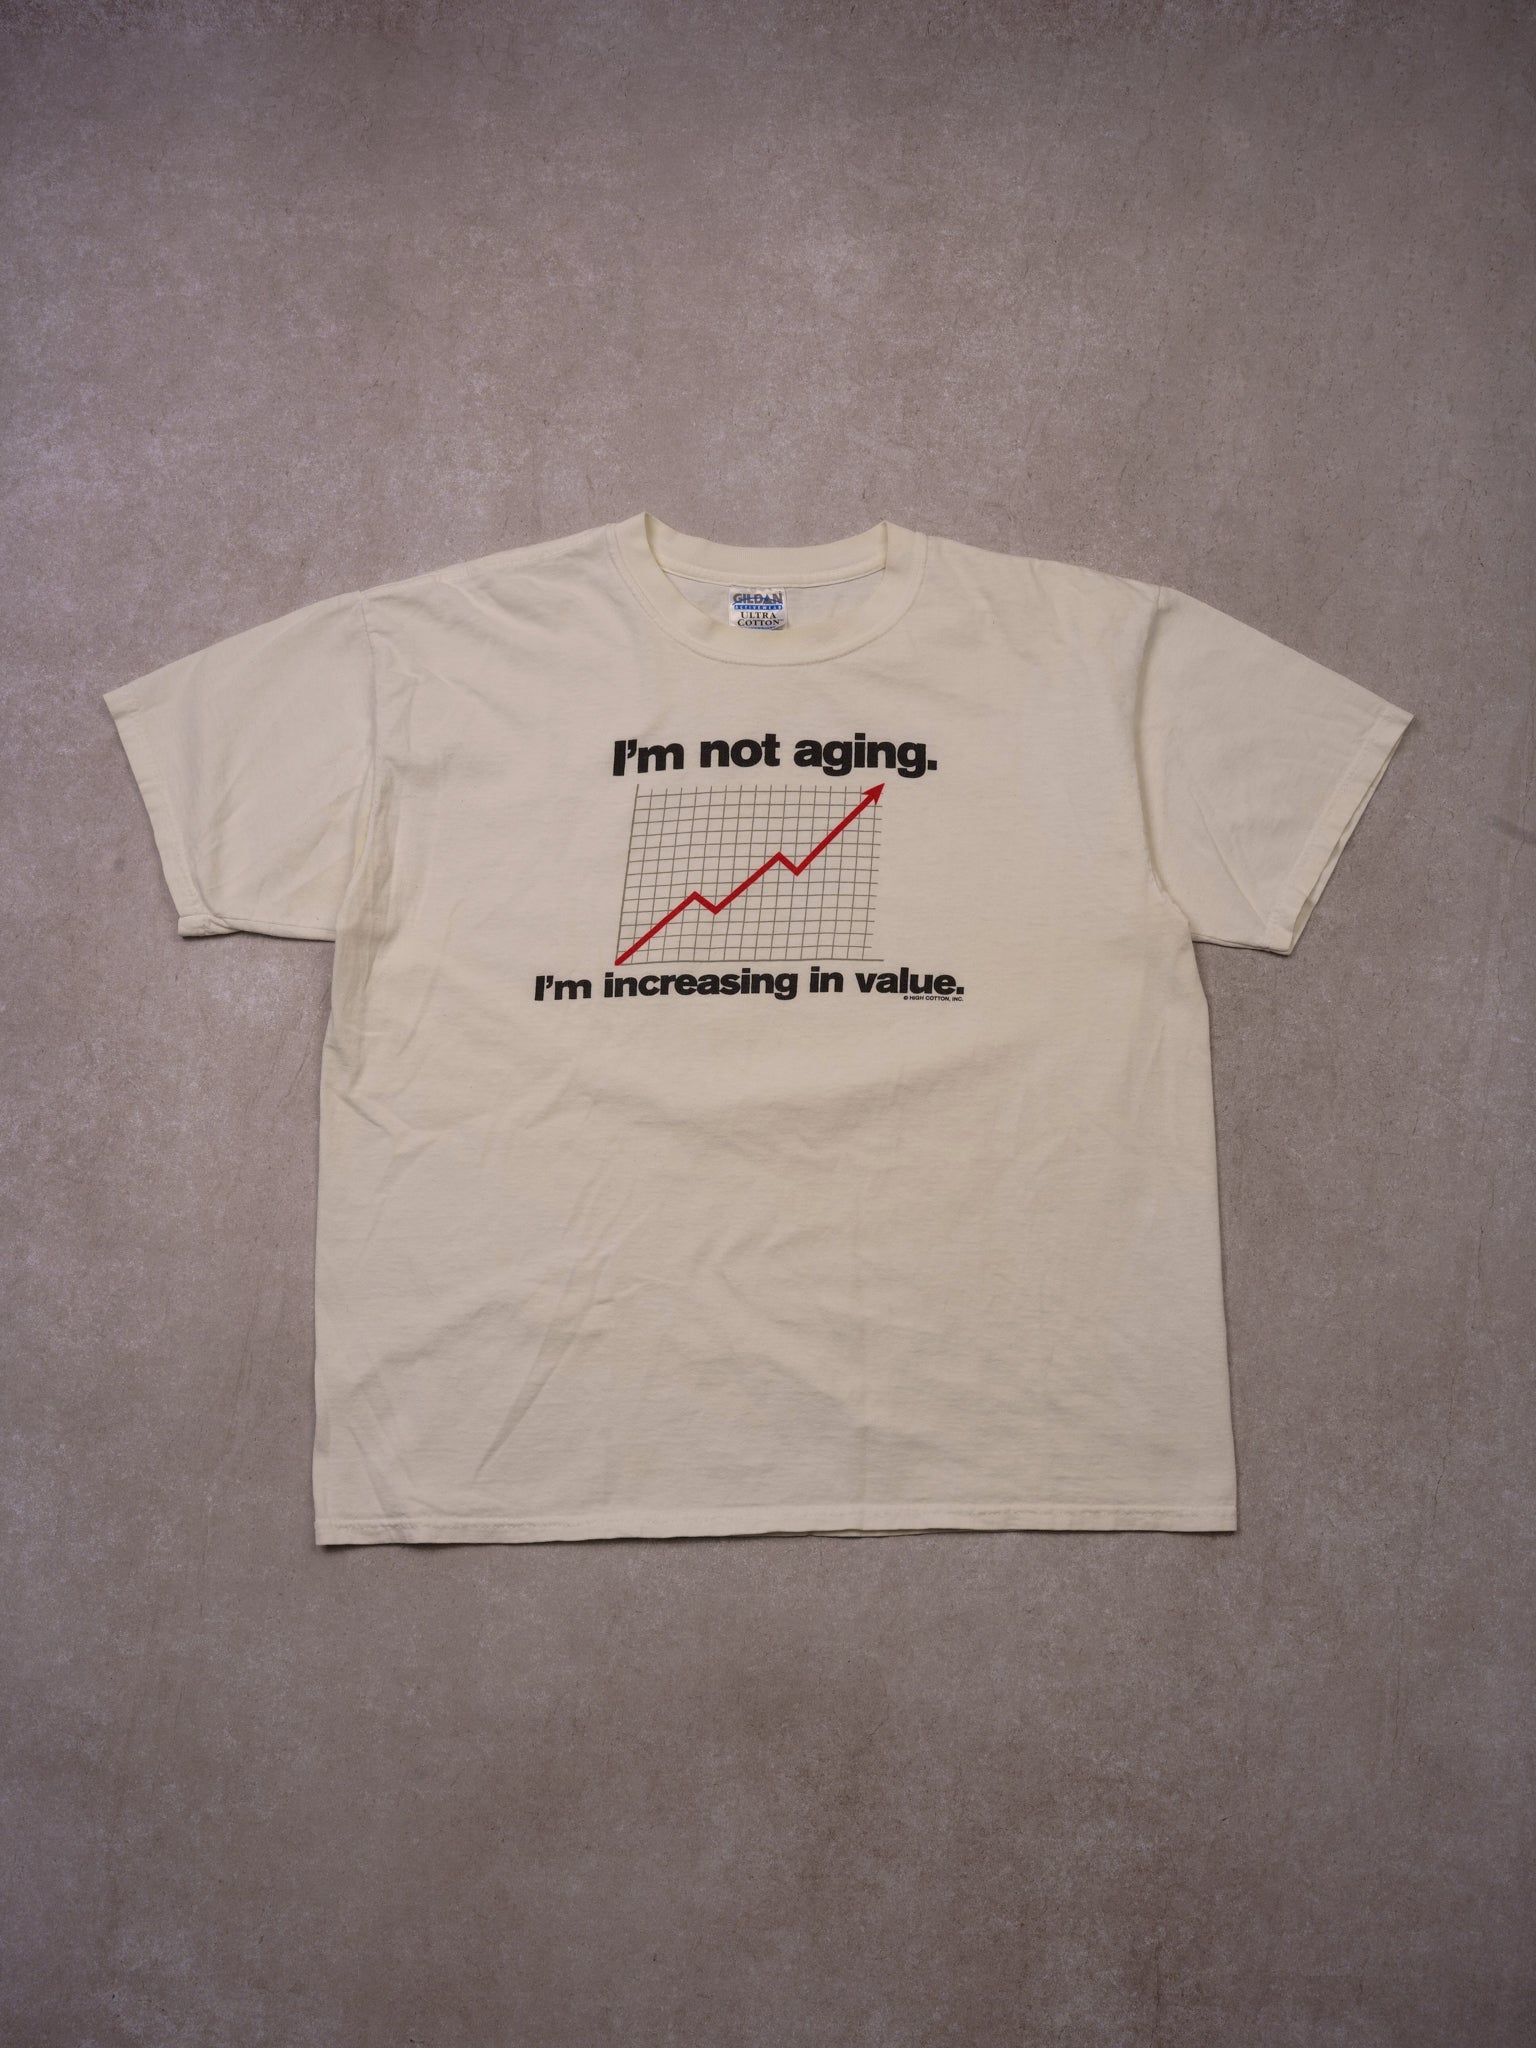 Vintage 90s White "i'm Not Aging. I'm increasing in value." Tee (M/L)